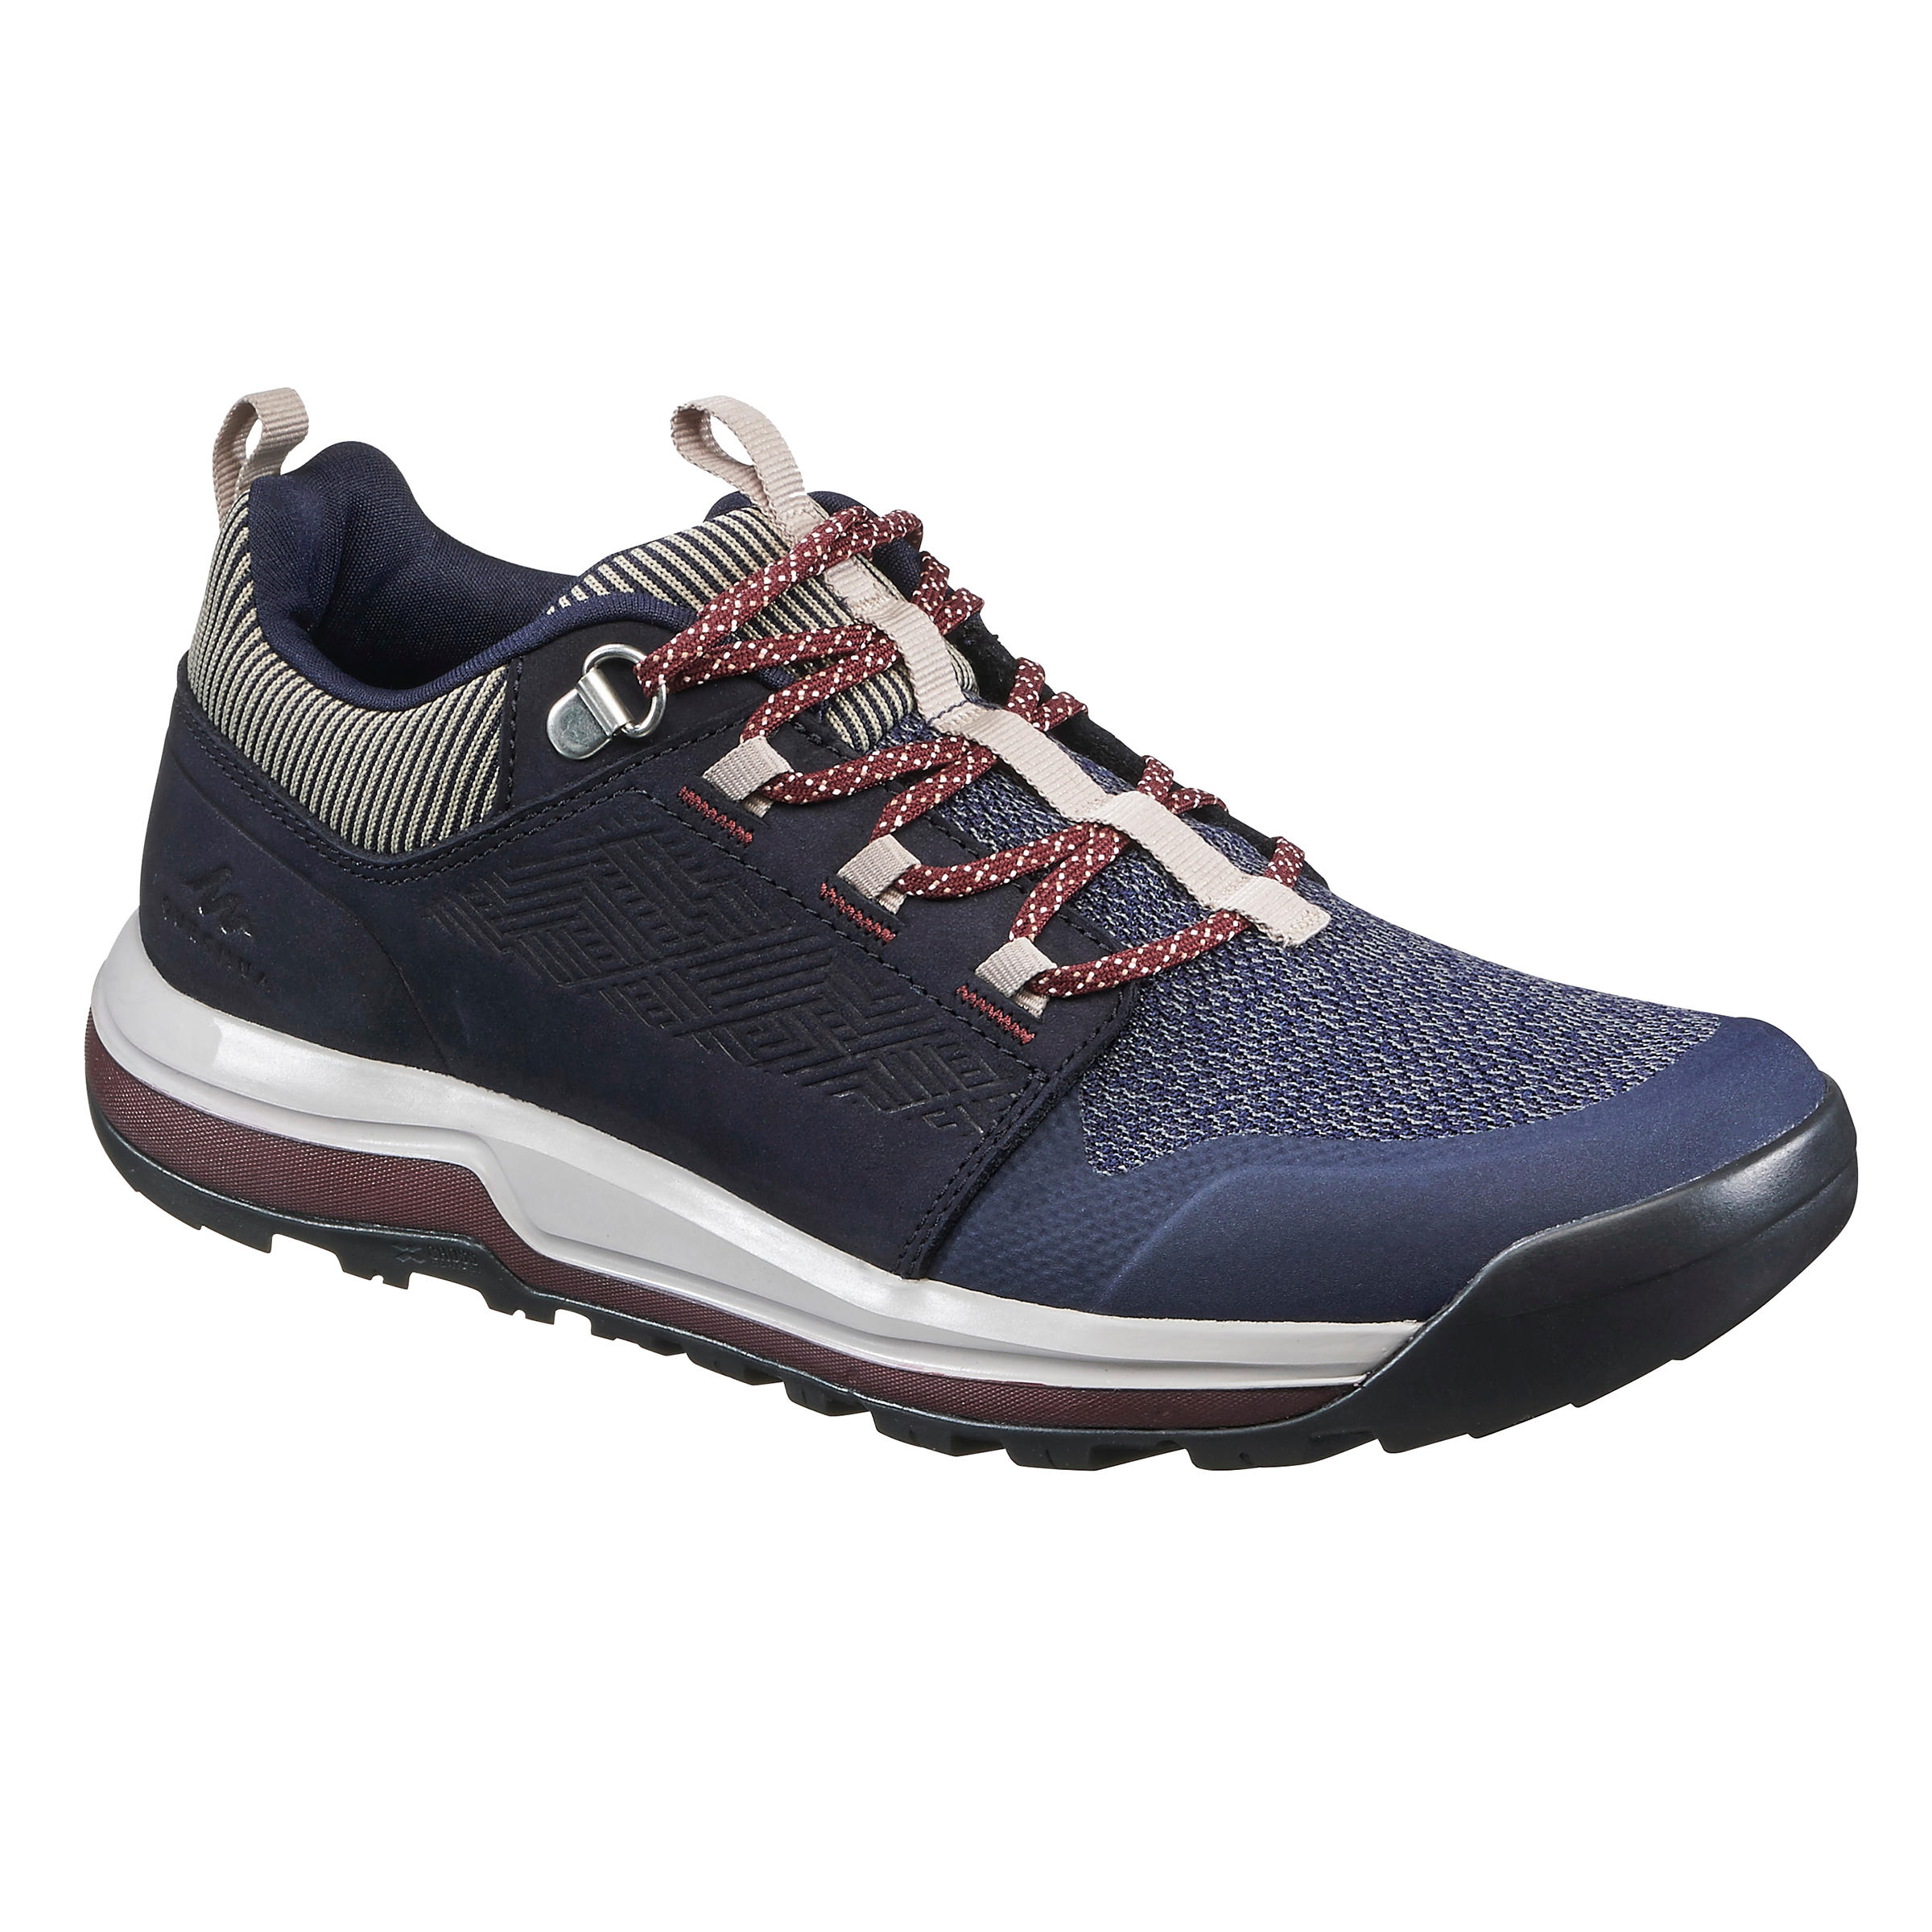 Country Walking Shoes - NH500 - Decathlon